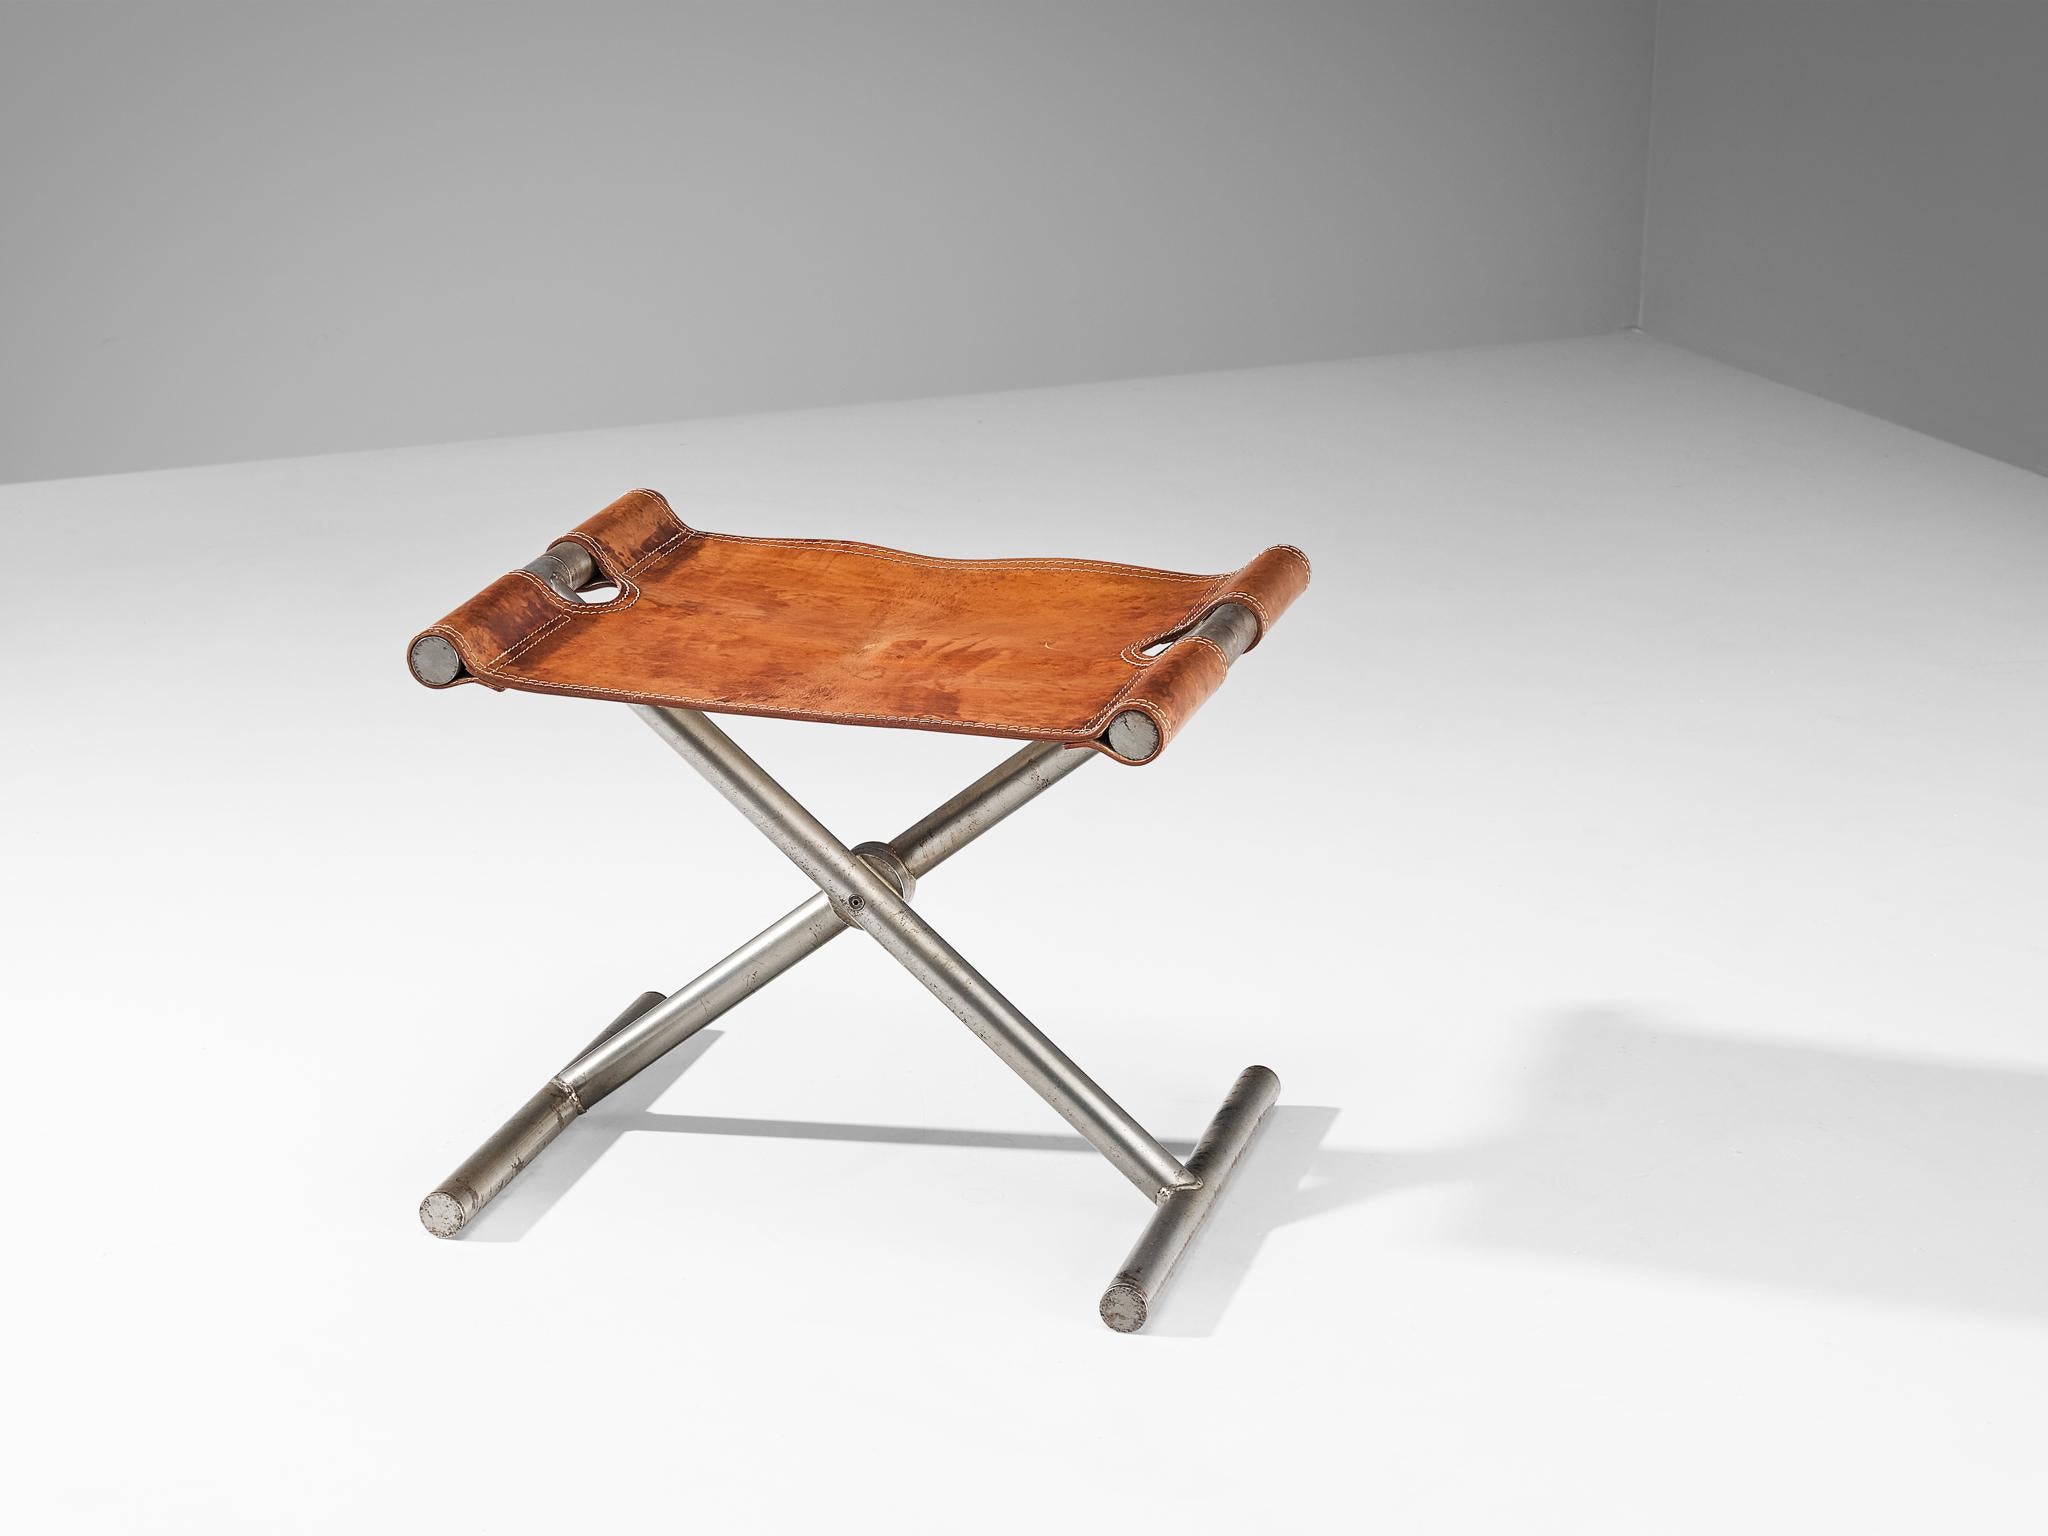 Afra & Tobia Scarpa for Benetton Office, folding stool or ottoman, leather, steel, Italy, 1985.

This rare stool is designed for the office of the clothing brand Benetton by Afra & Tobia Scarpa. Thick cognac leather in patinated condition is